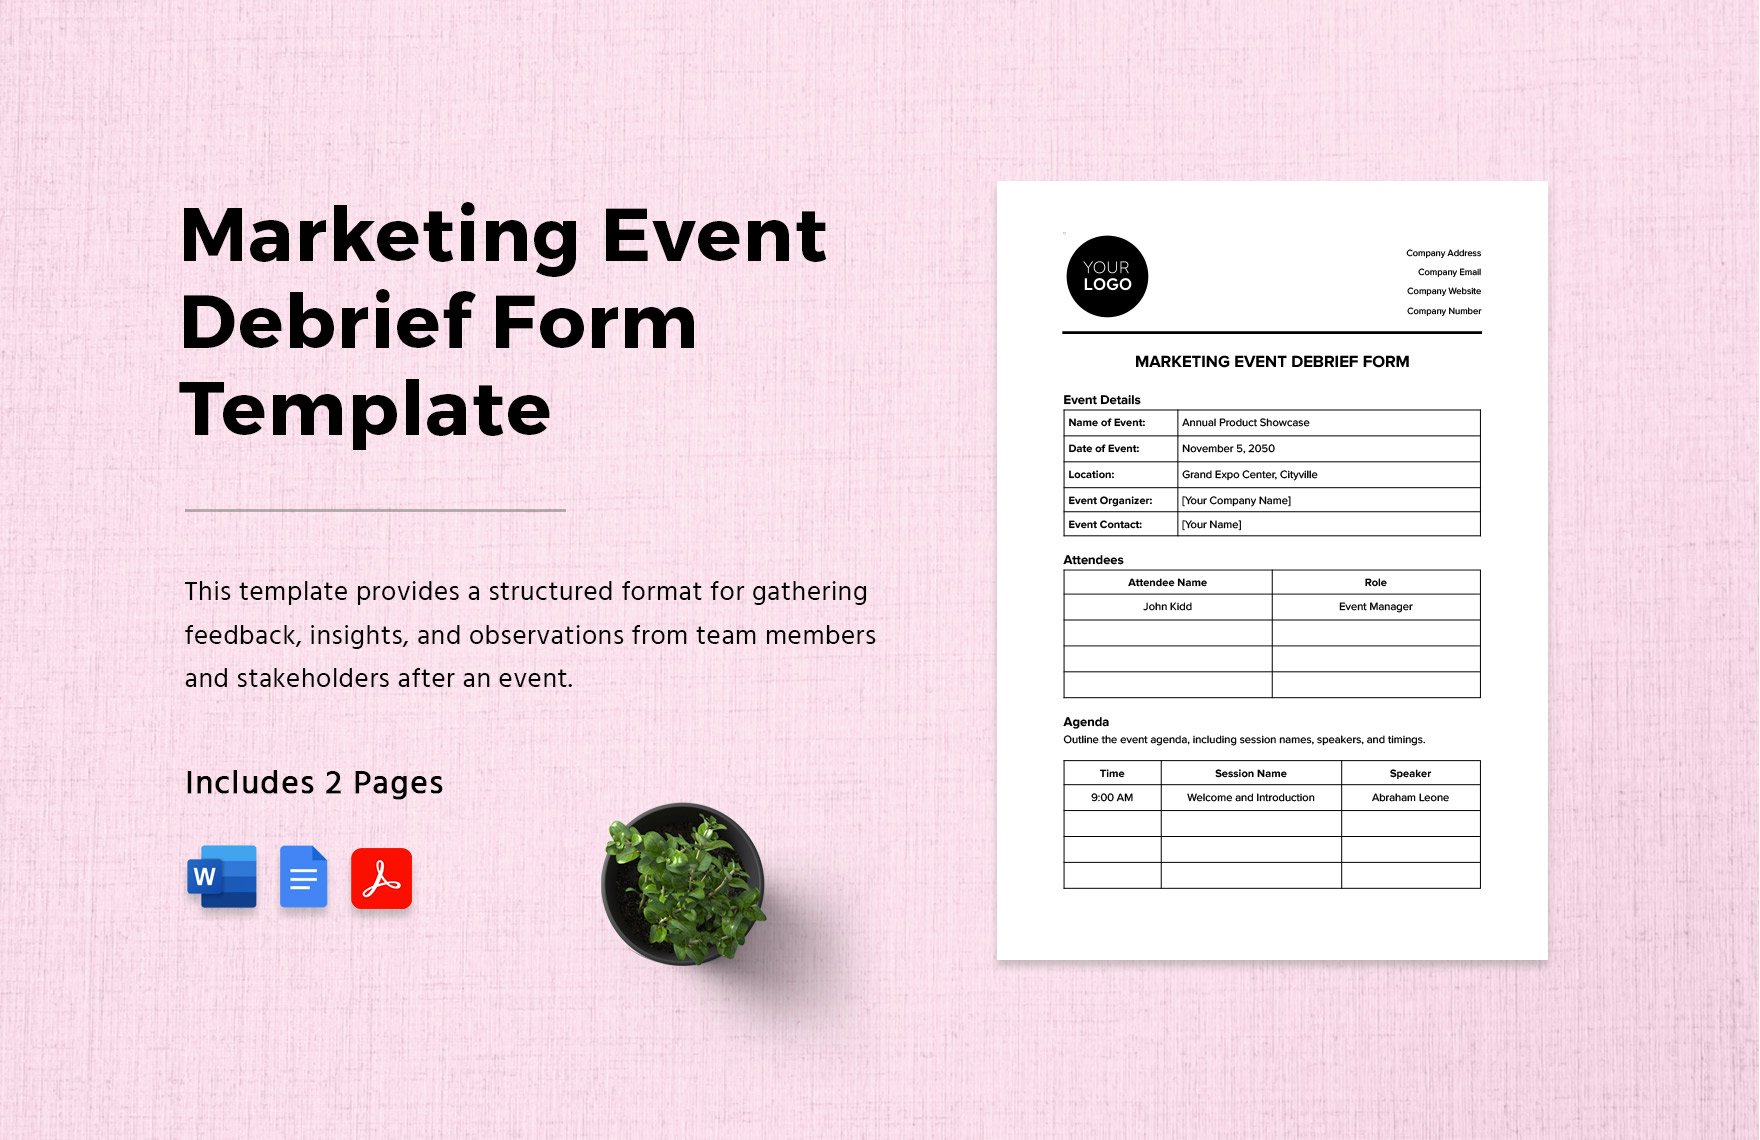 Marketing Event Debrief Form Template in Word, Google Docs, PDF